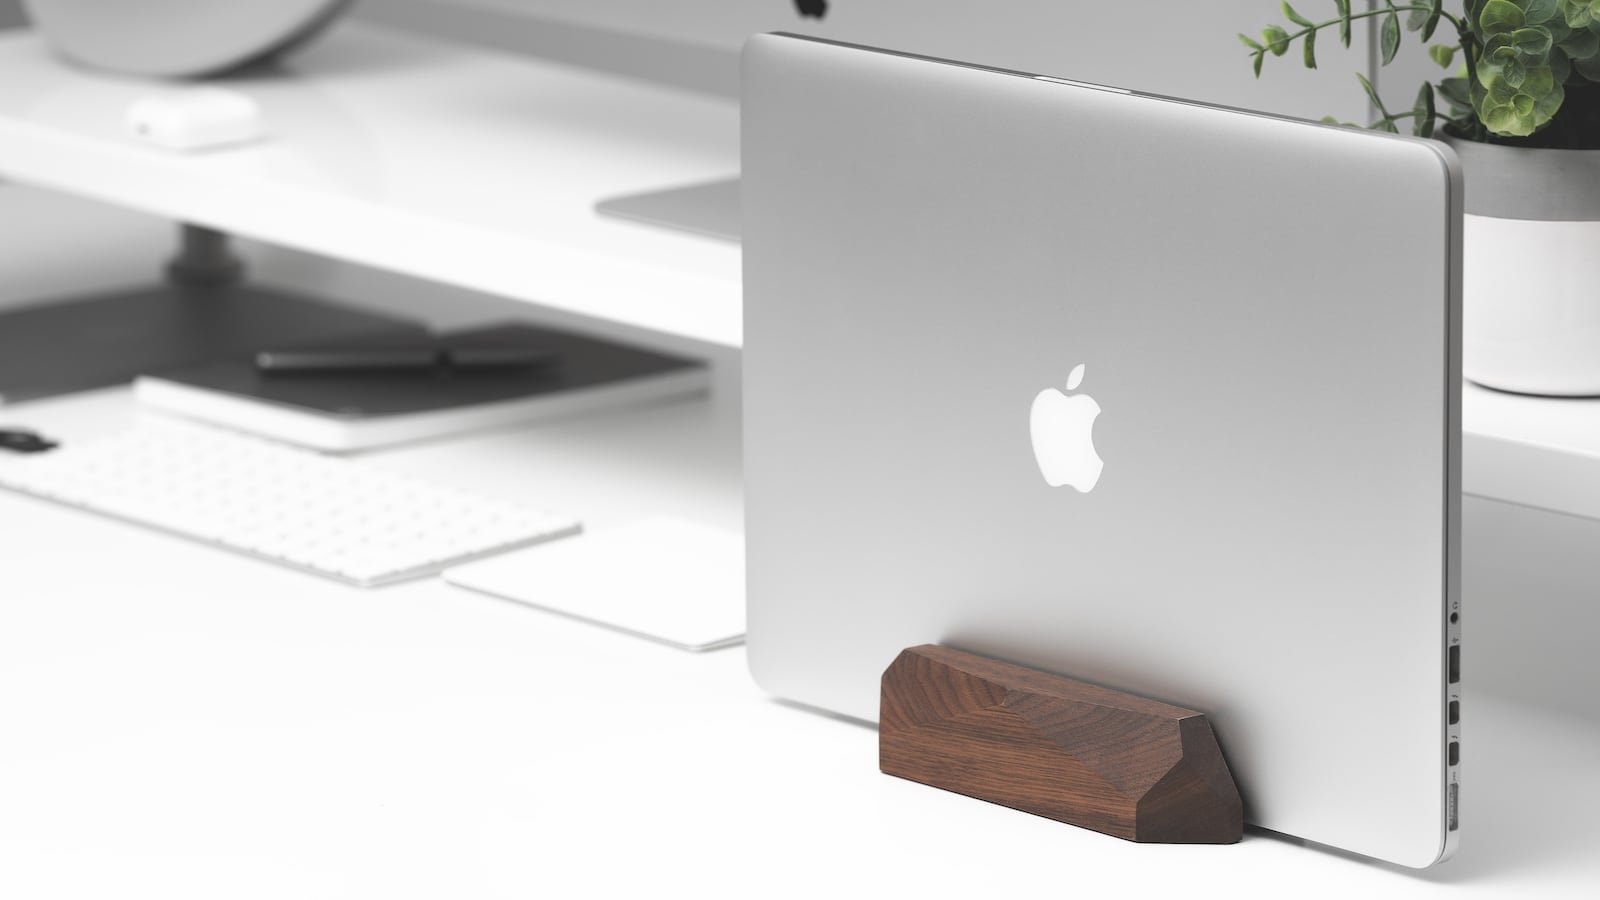 Oakywood Laptop Dock Vertical Wooden Stand frees up more space on your desk